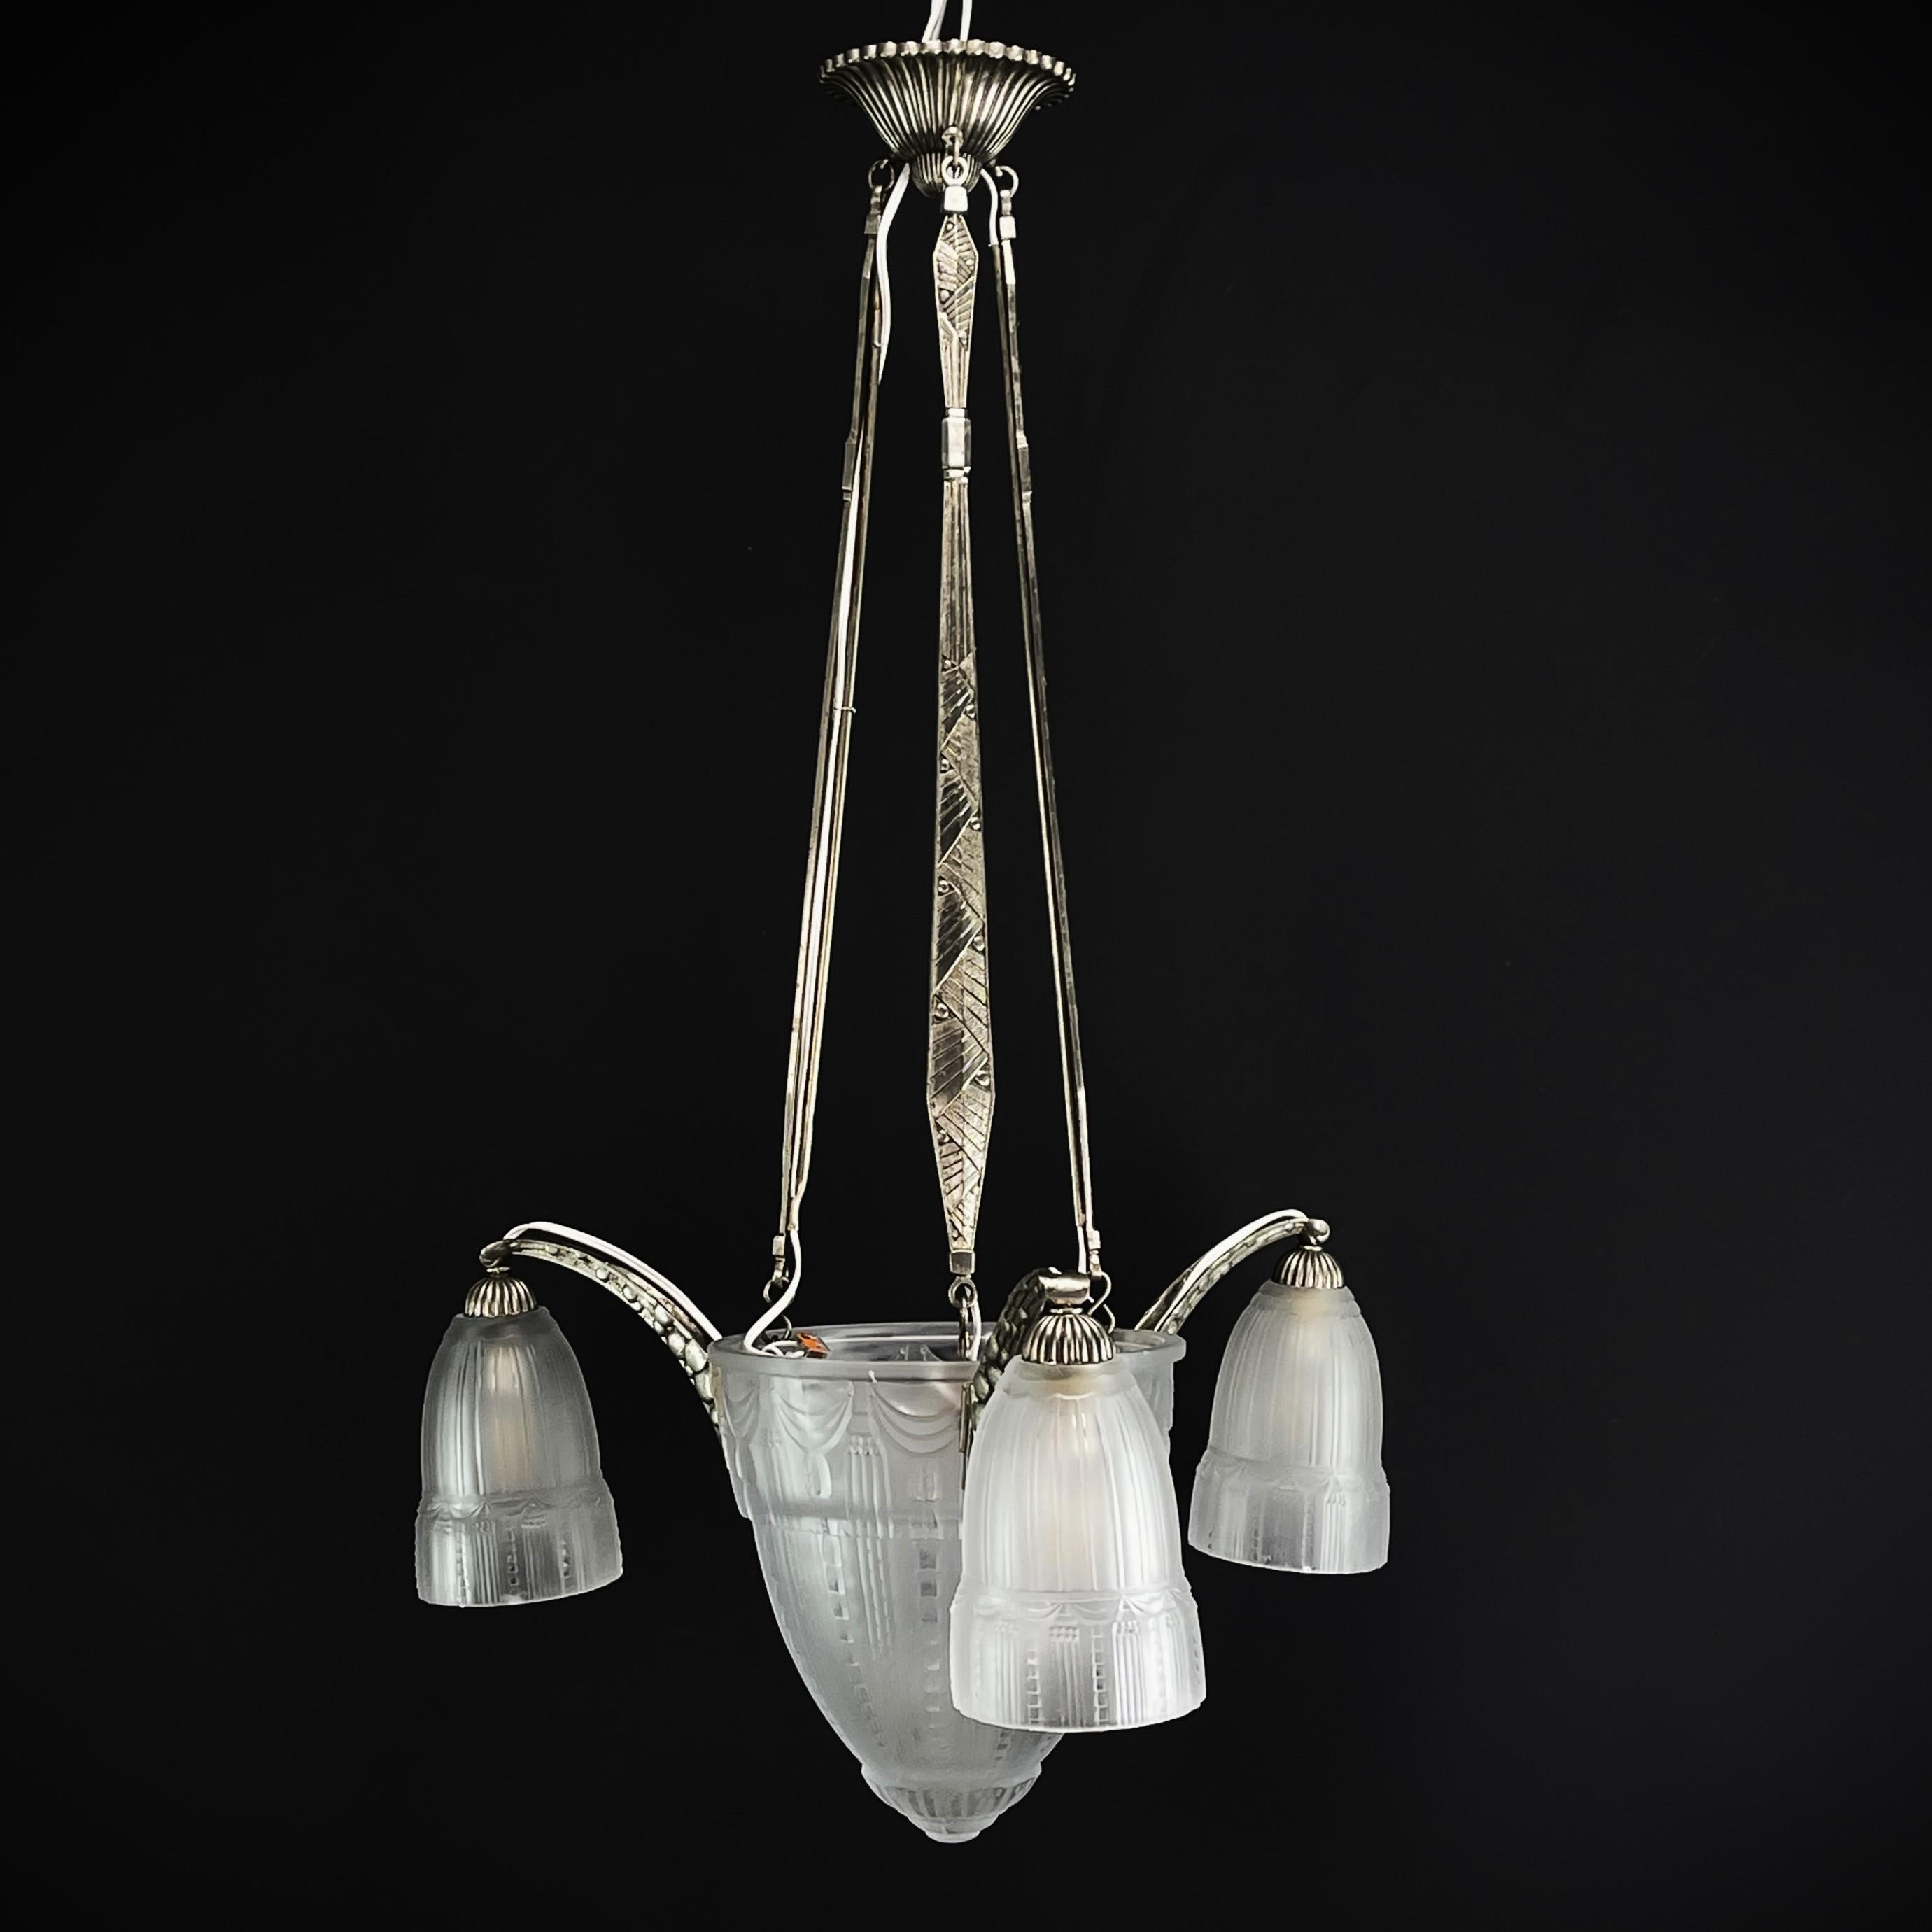 Art Deco chandeliers by Muller Frerés Luneville

This stunning Art Deco chandelier from the 1930s is an outstanding example of the elegance and sophistication of the Art Deco style. With its combination of nickel-plated bronze and glass, this